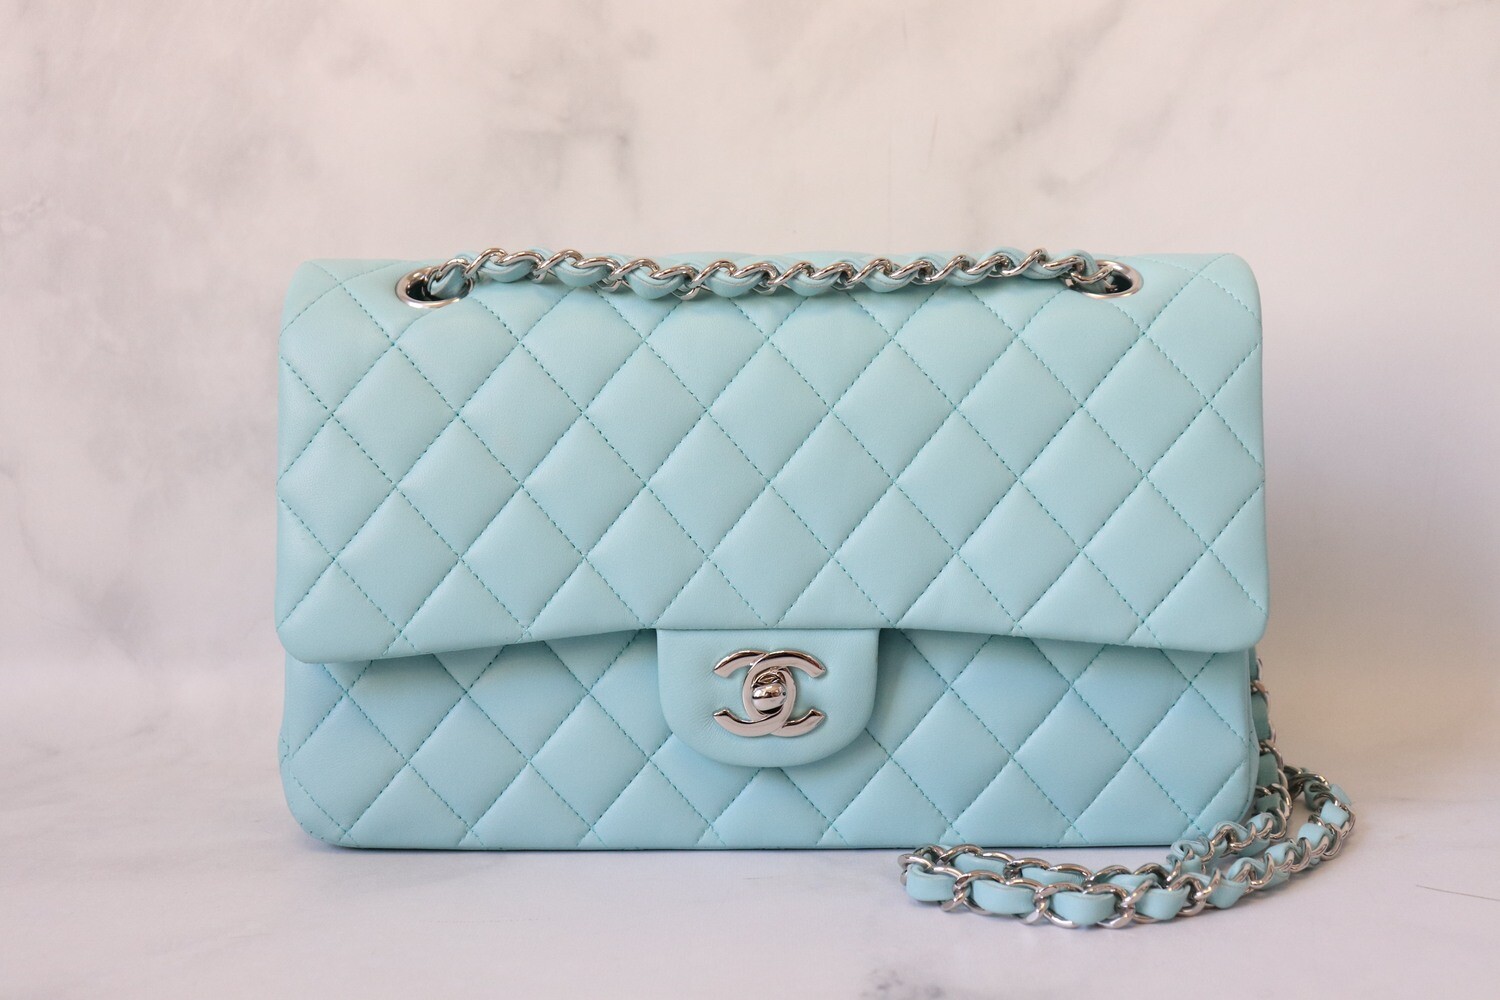 Chanel Classic Medium Double Flap 19C, Light Tiffany Blue Lambskin Leather  with Silver Hardware, Preowned in Box - Julia Rose Boston